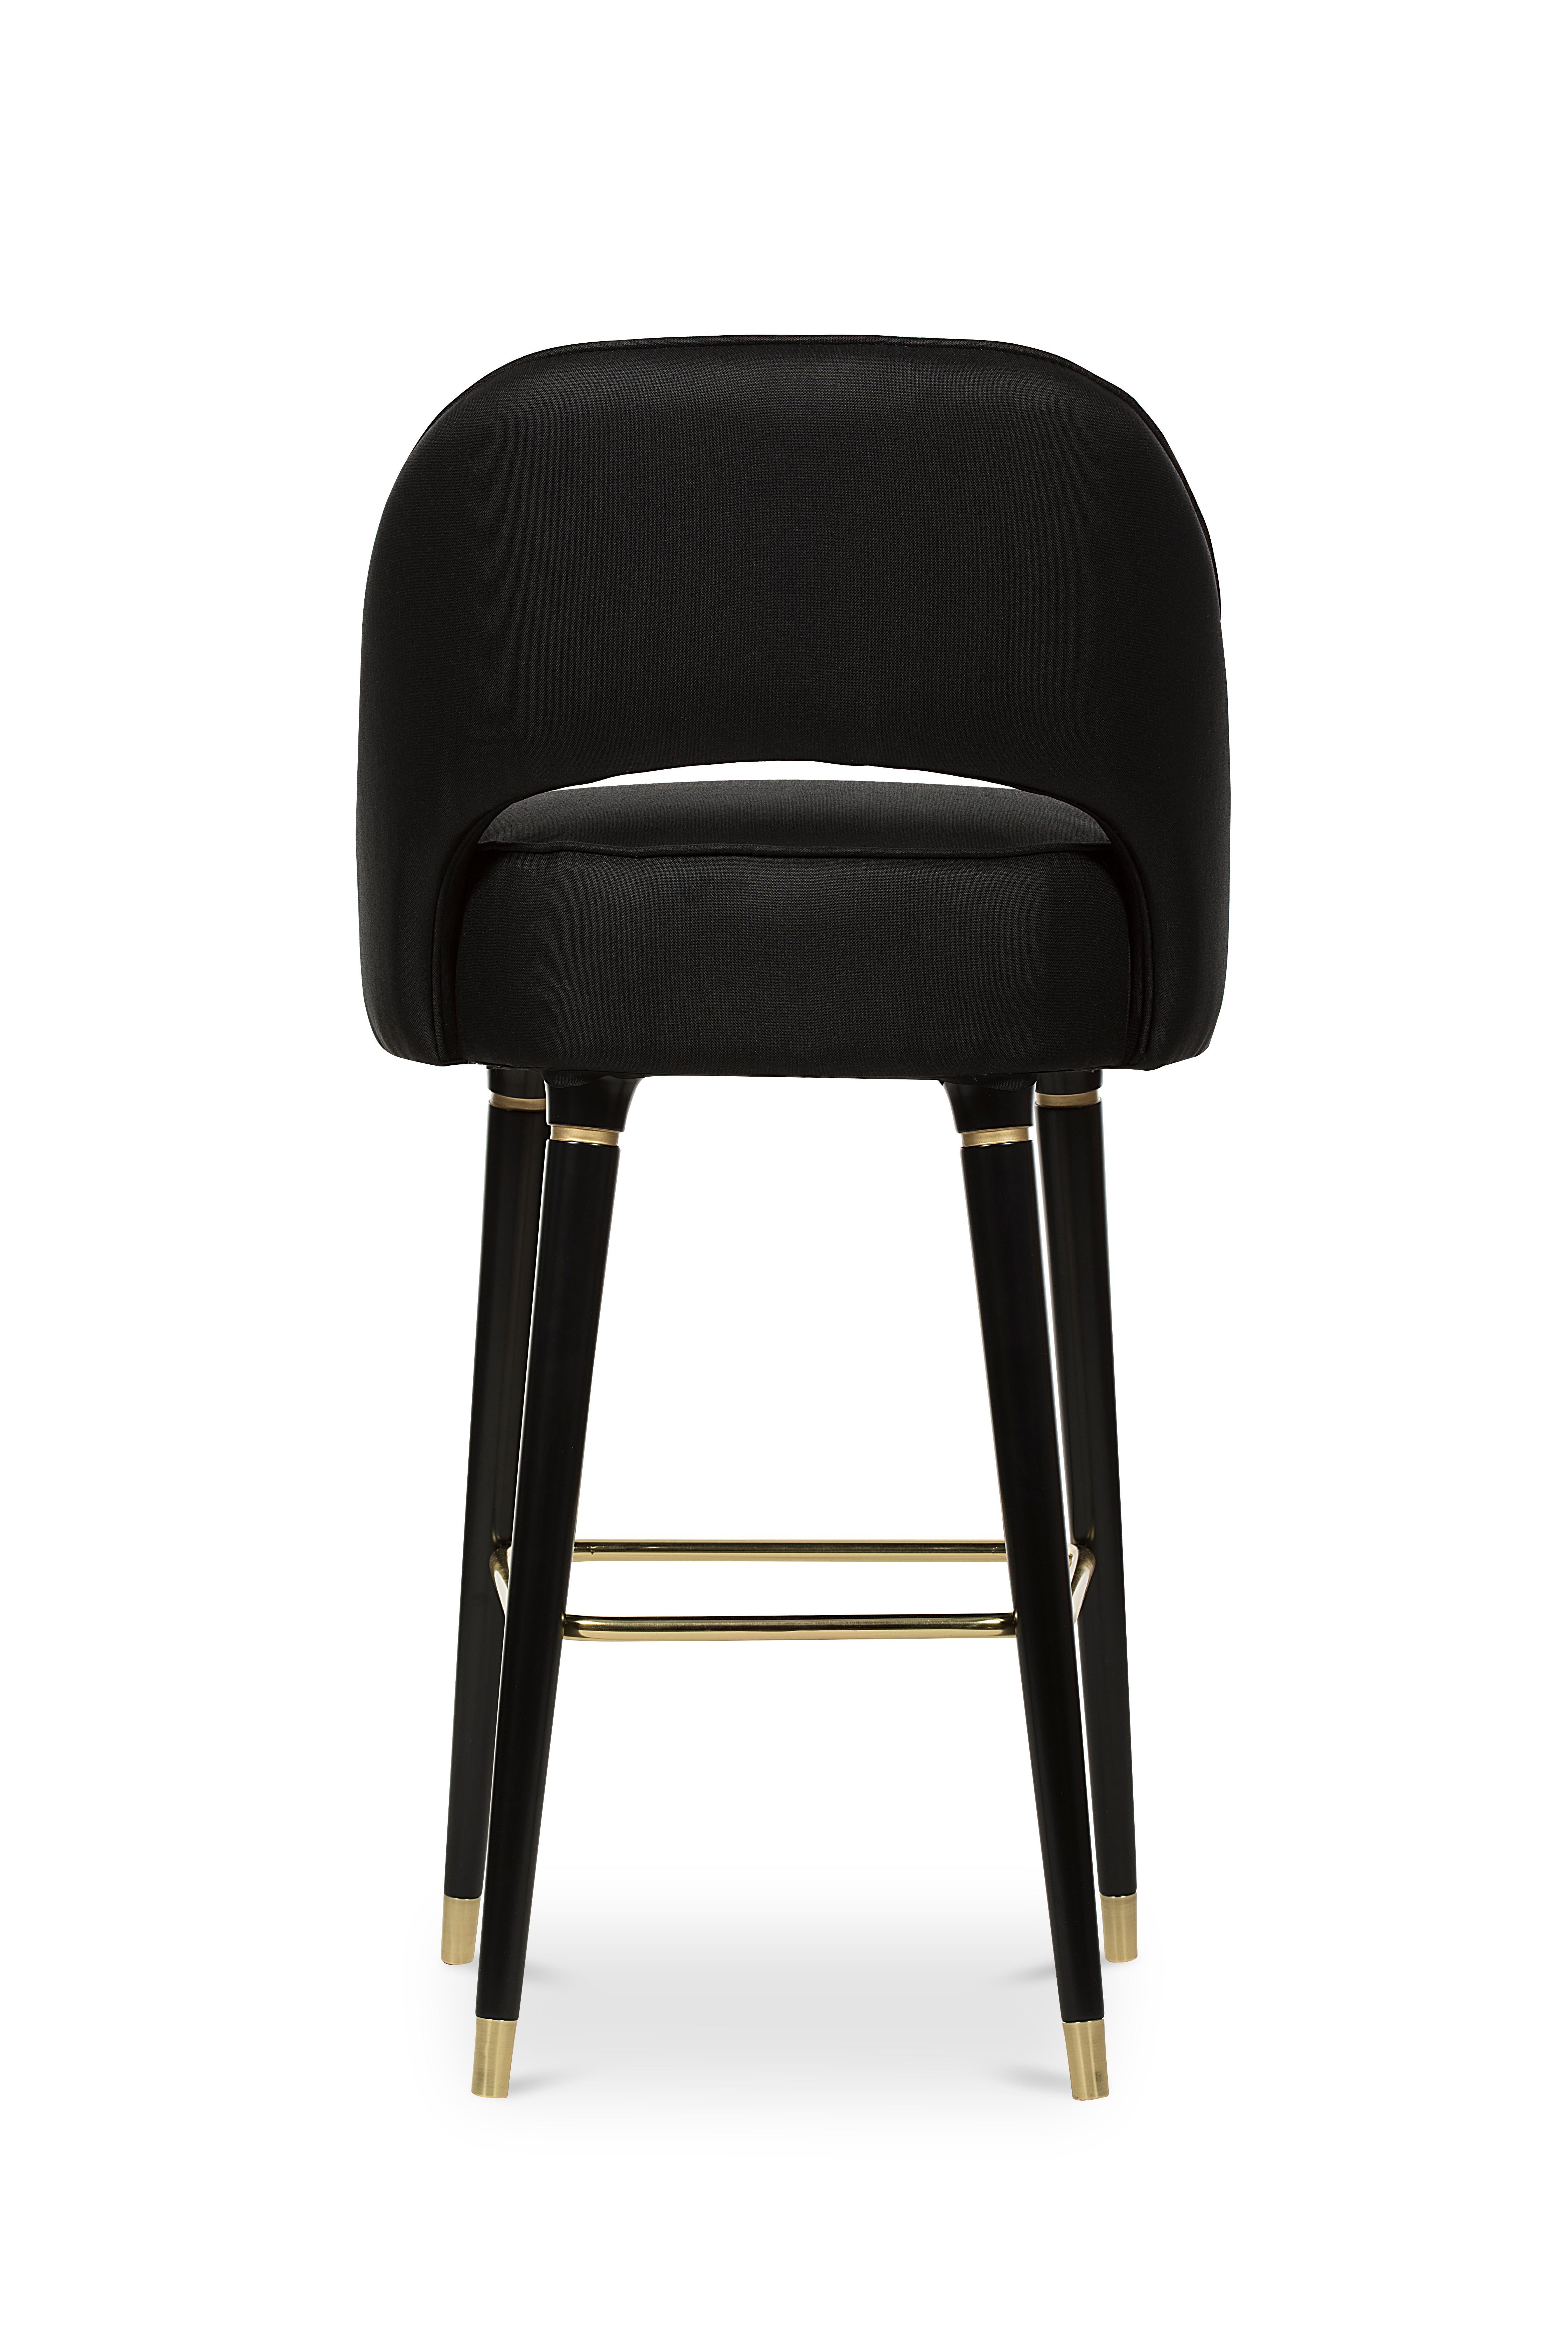 Collins is an open back chair with sleek lines and subtle details. The glamorous glossy legs accented with polished brass tips give this piece its mid-century modern touch. Collins Bar Chair sets up a luxurious statement in home furnishings. Set the